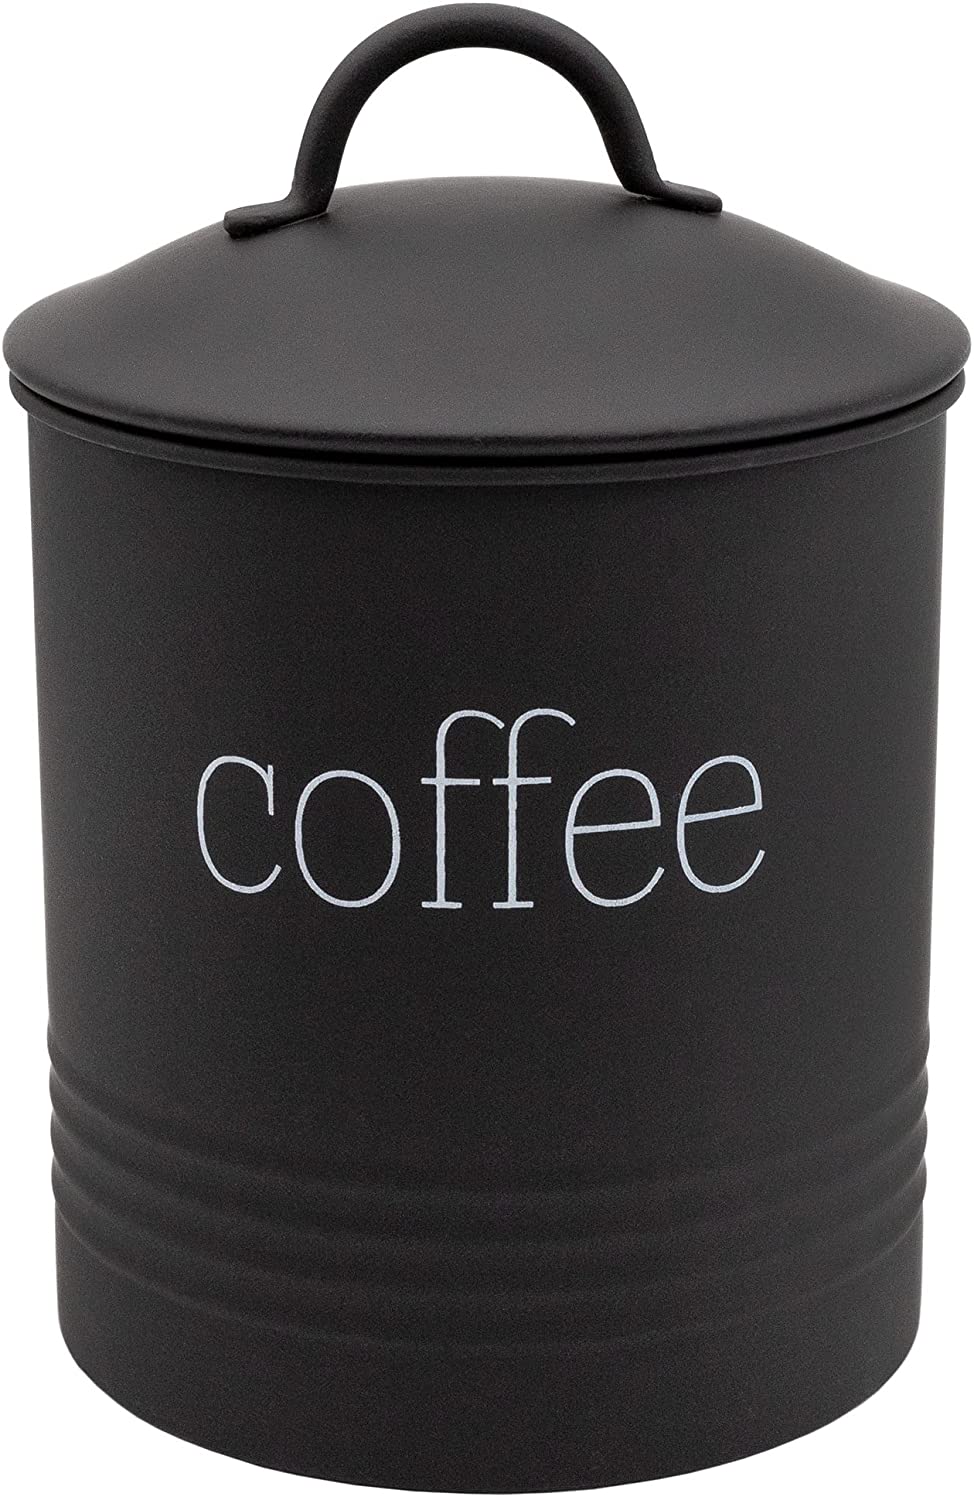 AuldHome Retro Iron Coffee Canister